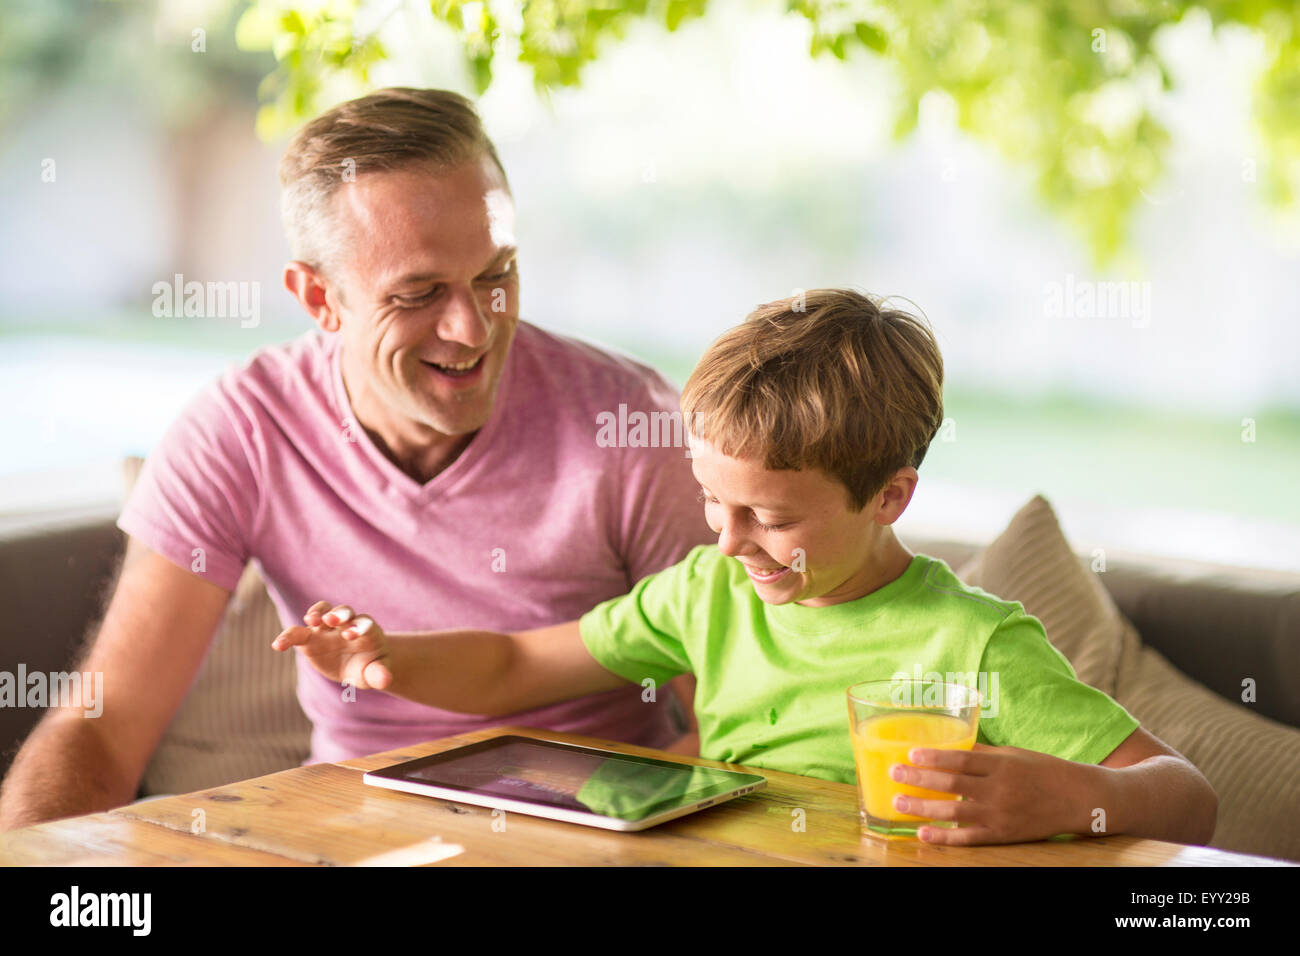 Caucasian father and son using digital tablet outdoors Stock Photo